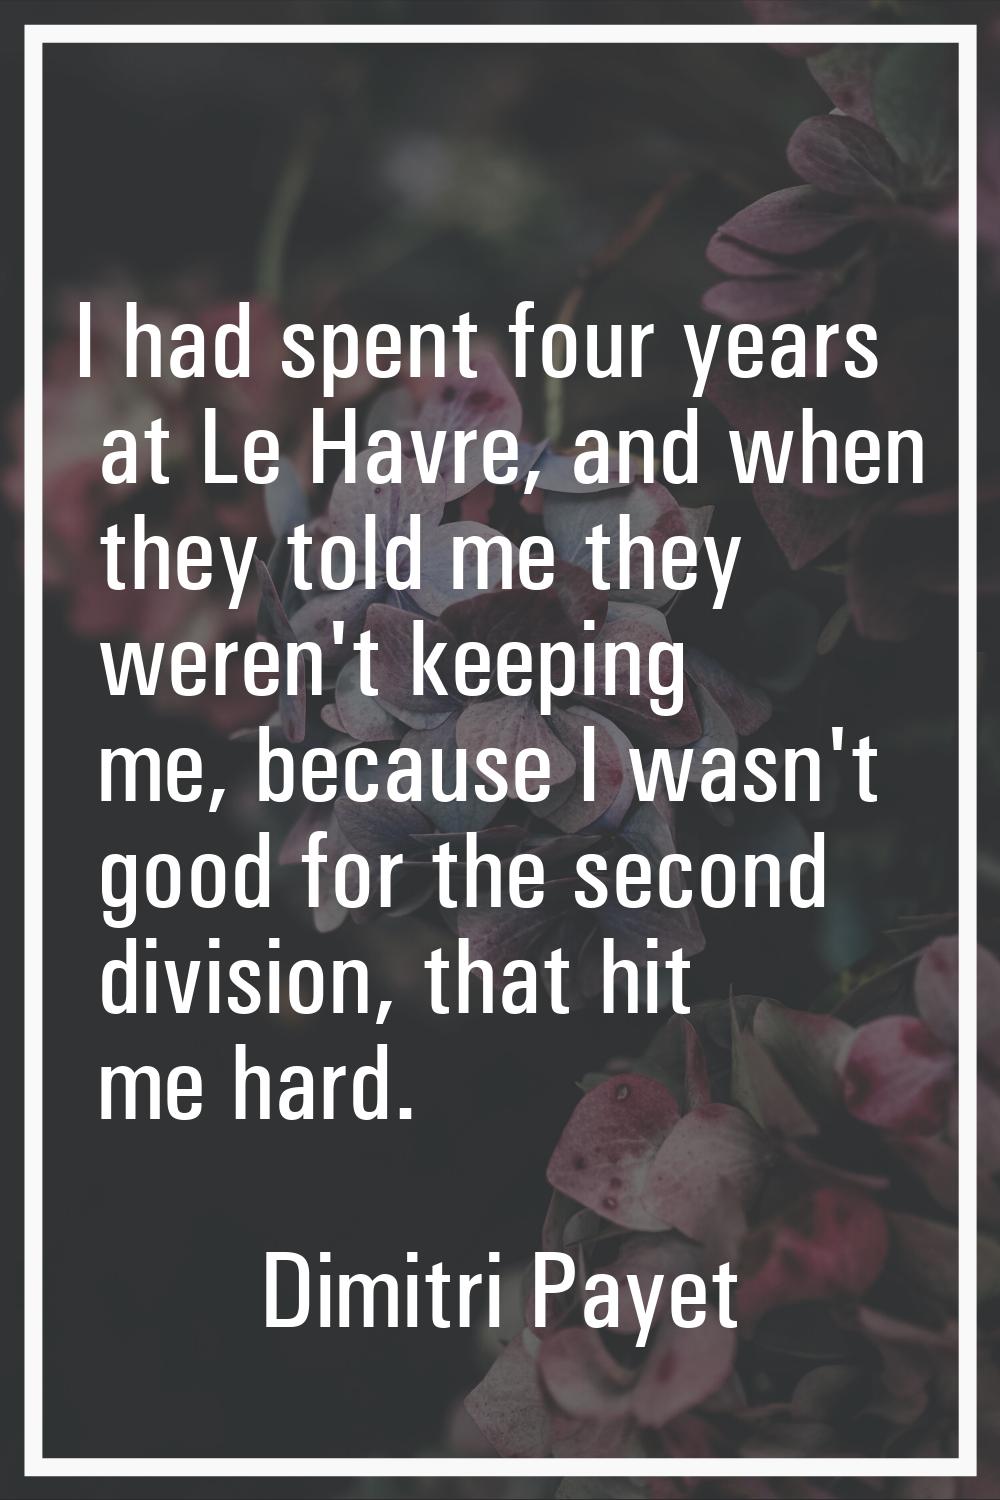 I had spent four years at Le Havre, and when they told me they weren't keeping me, because I wasn't